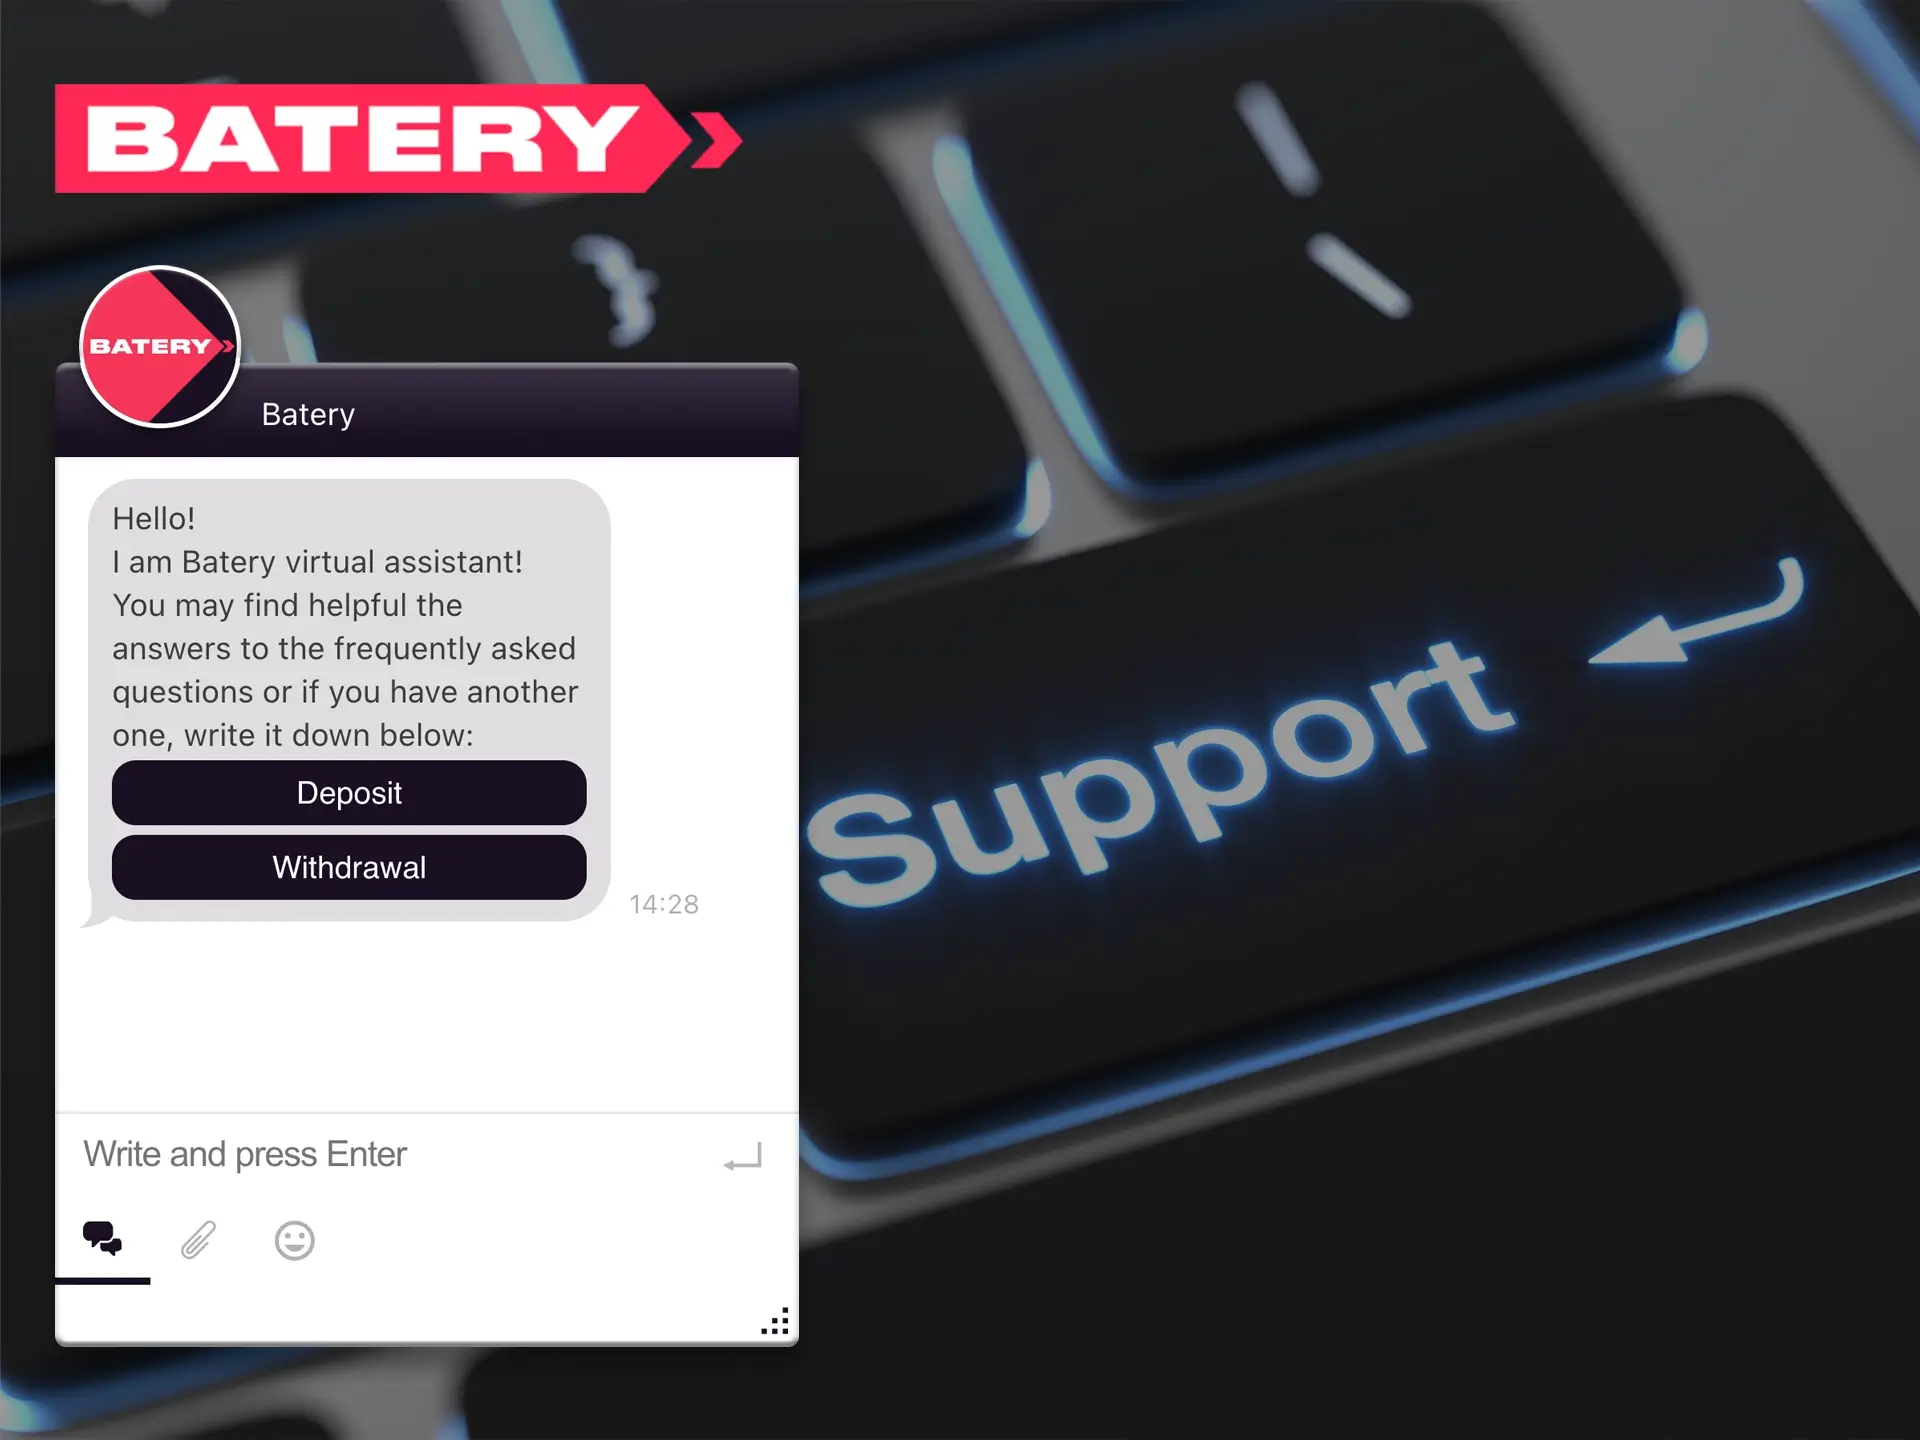 Batery regularly improves the quality of service provided to its users, so if you have any questions, you can always contact the 24/7 live chat.